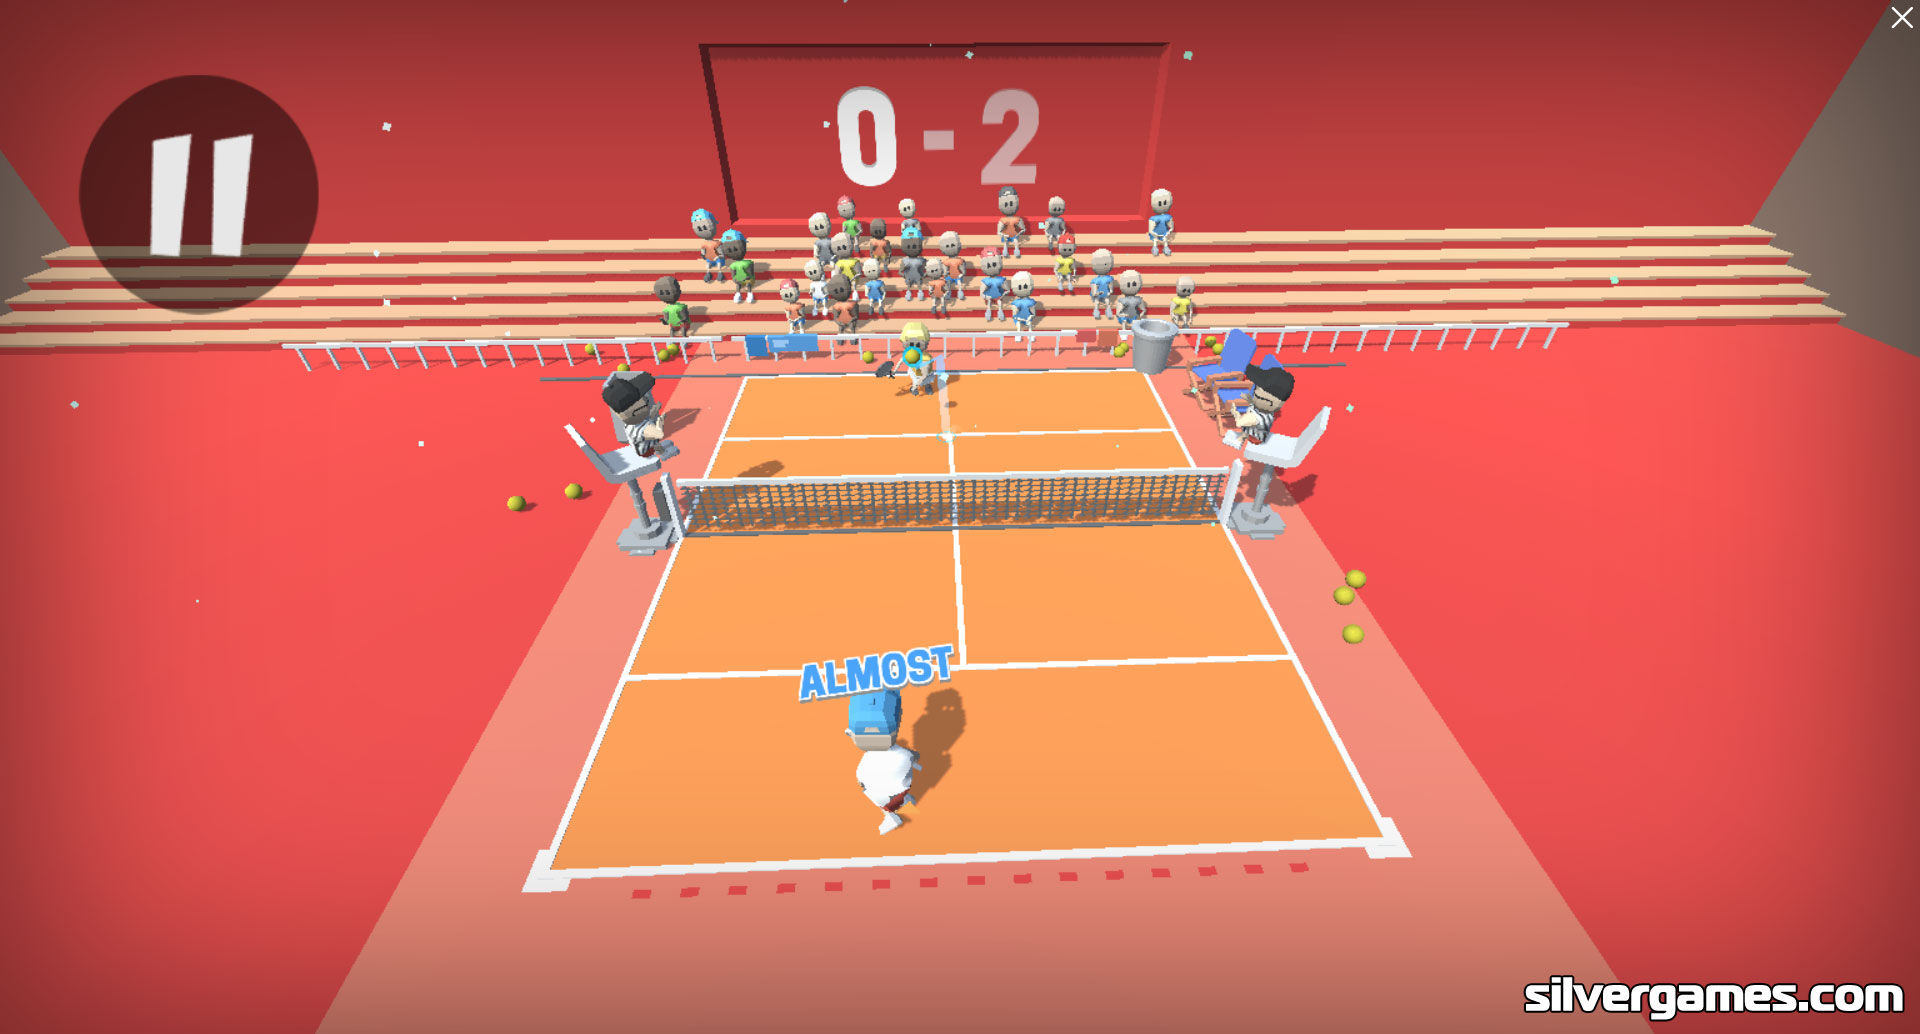 Table Tennis World Tour - 🕹️ Online Game